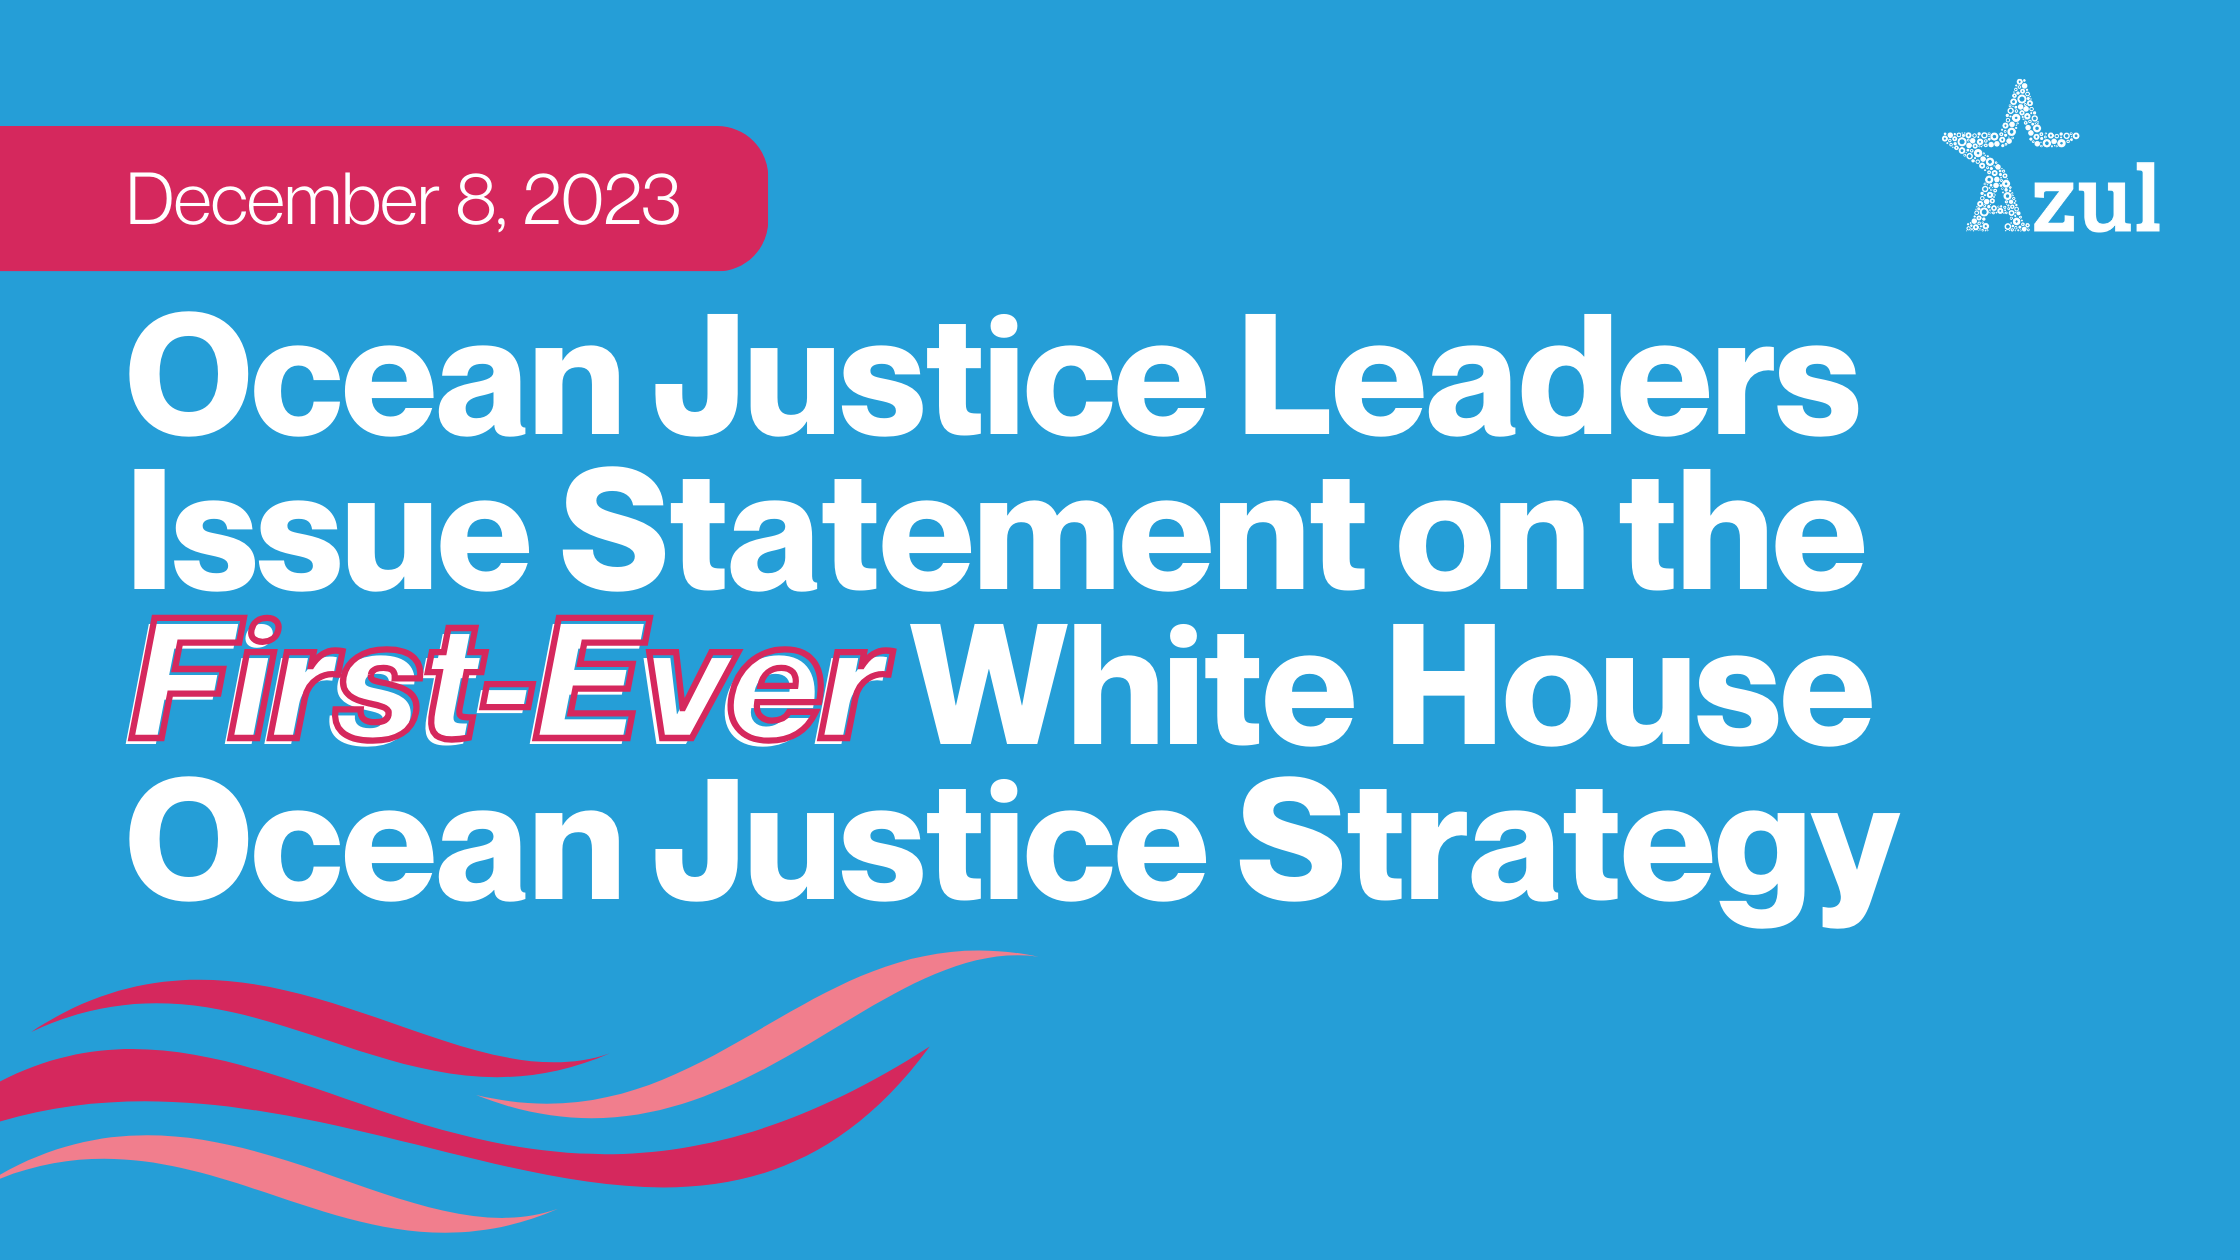 Ocean Justice Leaders Issue Statement on the First-Ever White House Ocean Justice Strategy